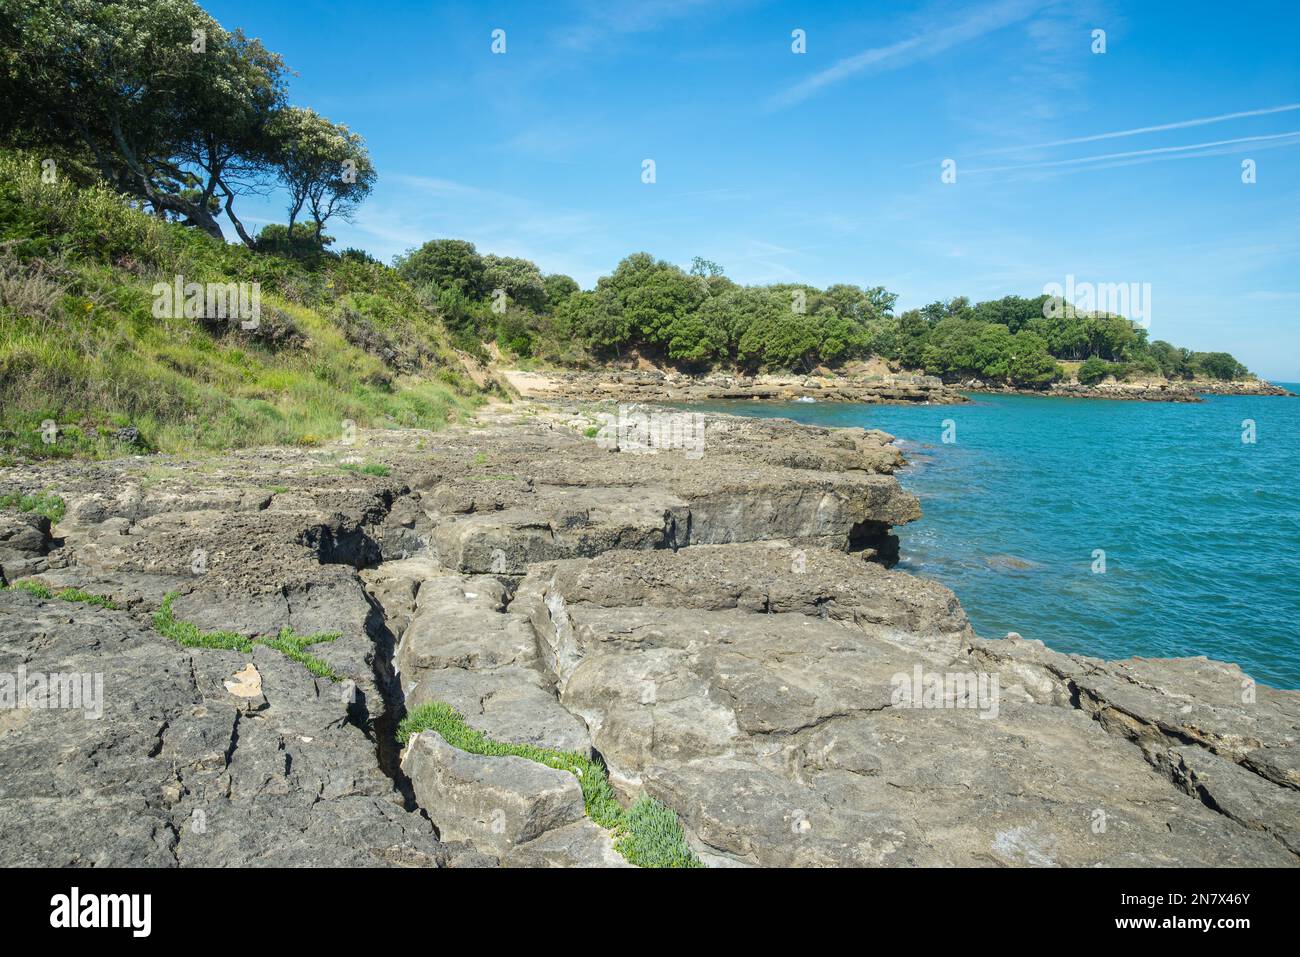 Ile d'Aix Charente Maritime Atlantic coast France rugged rocky coastline and turquoise Atlantic ocean and trees on shores in summer Stock Photo